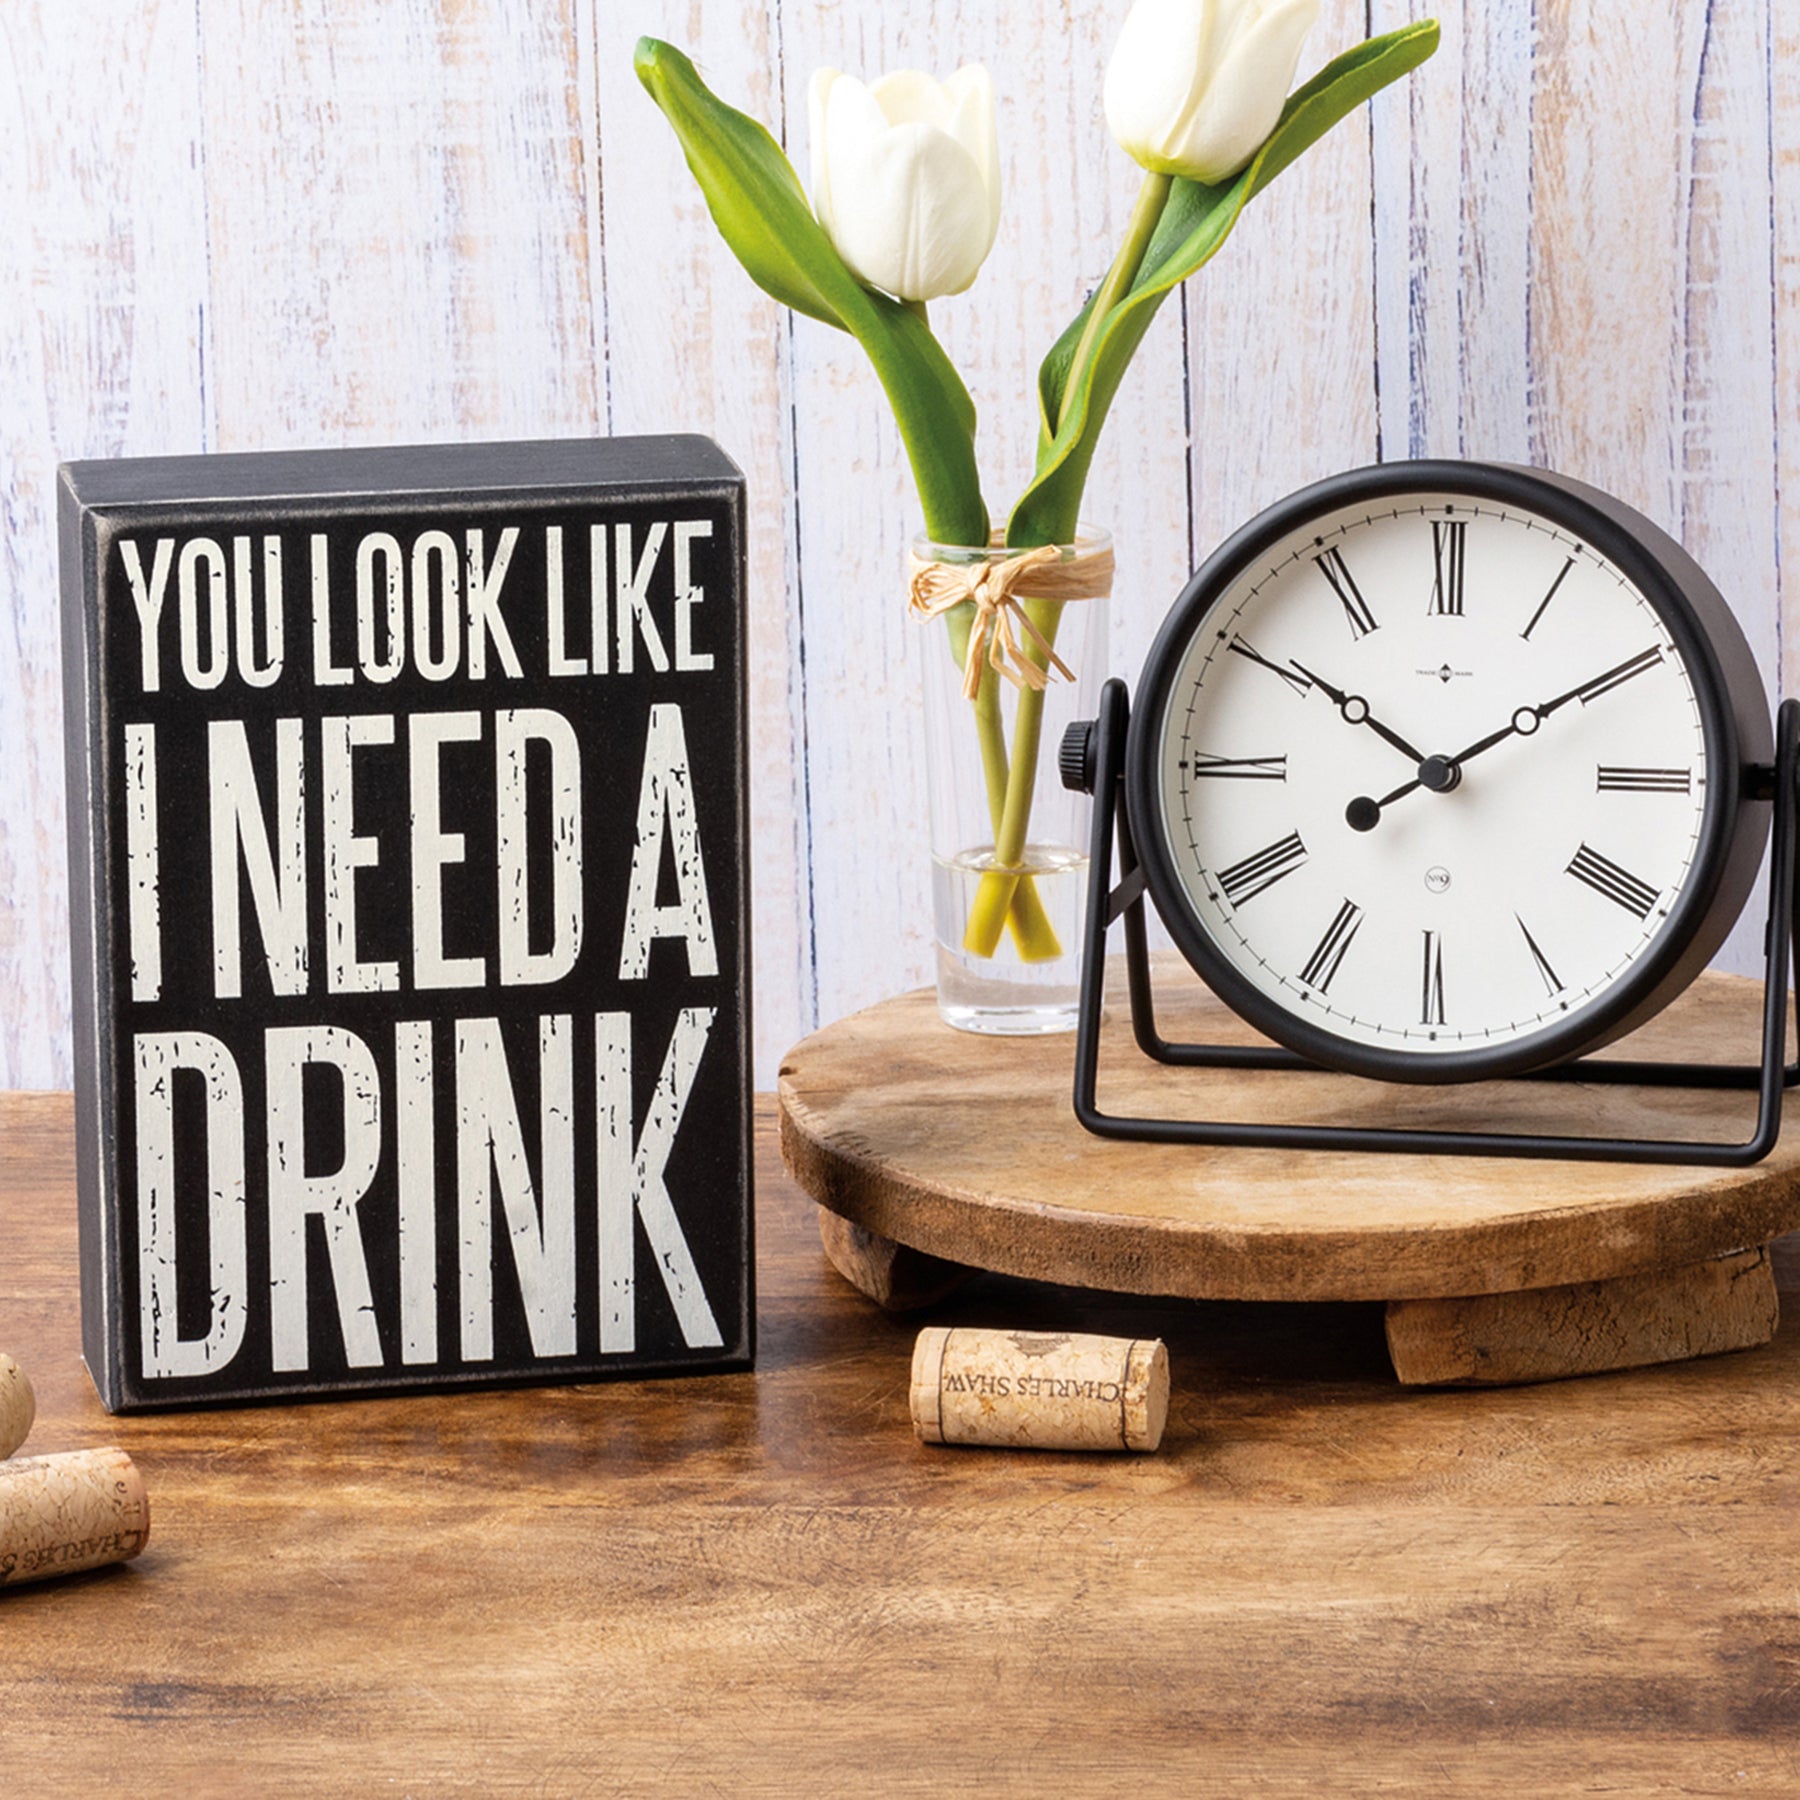 you look like I need a drink sign